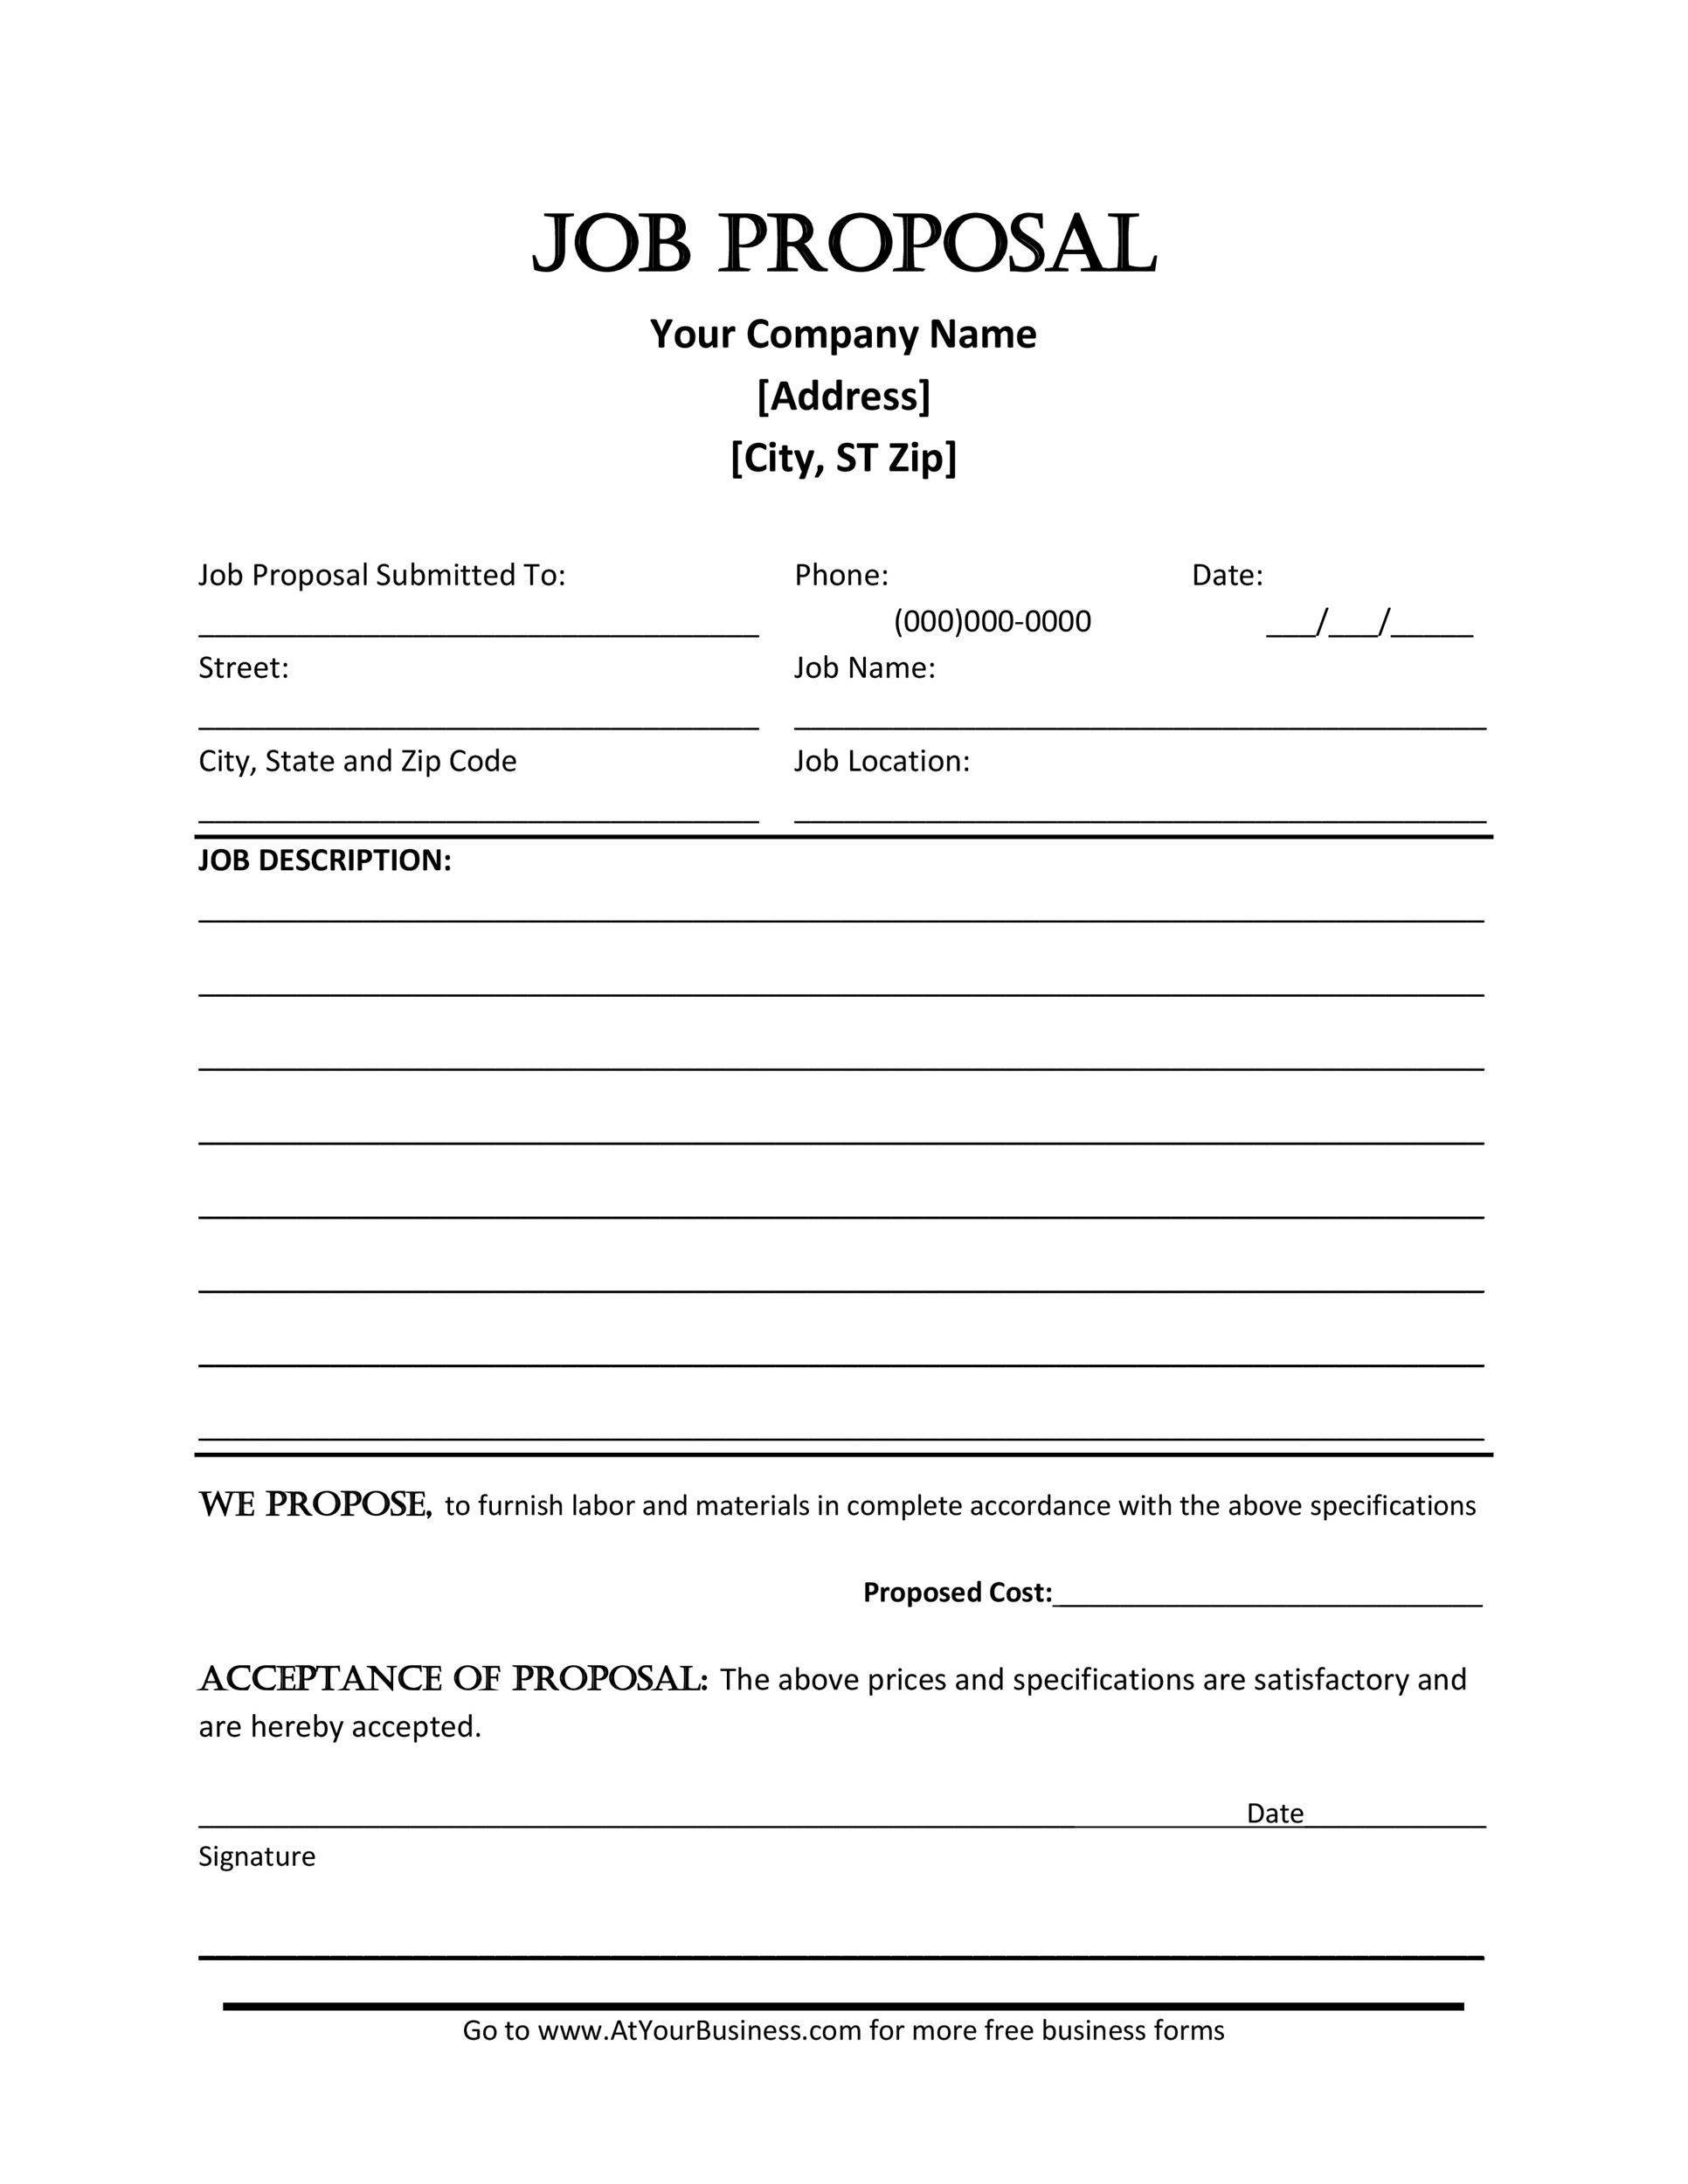 Job Proposal Template Free Word Of 30 Business Proposal Templates Riset